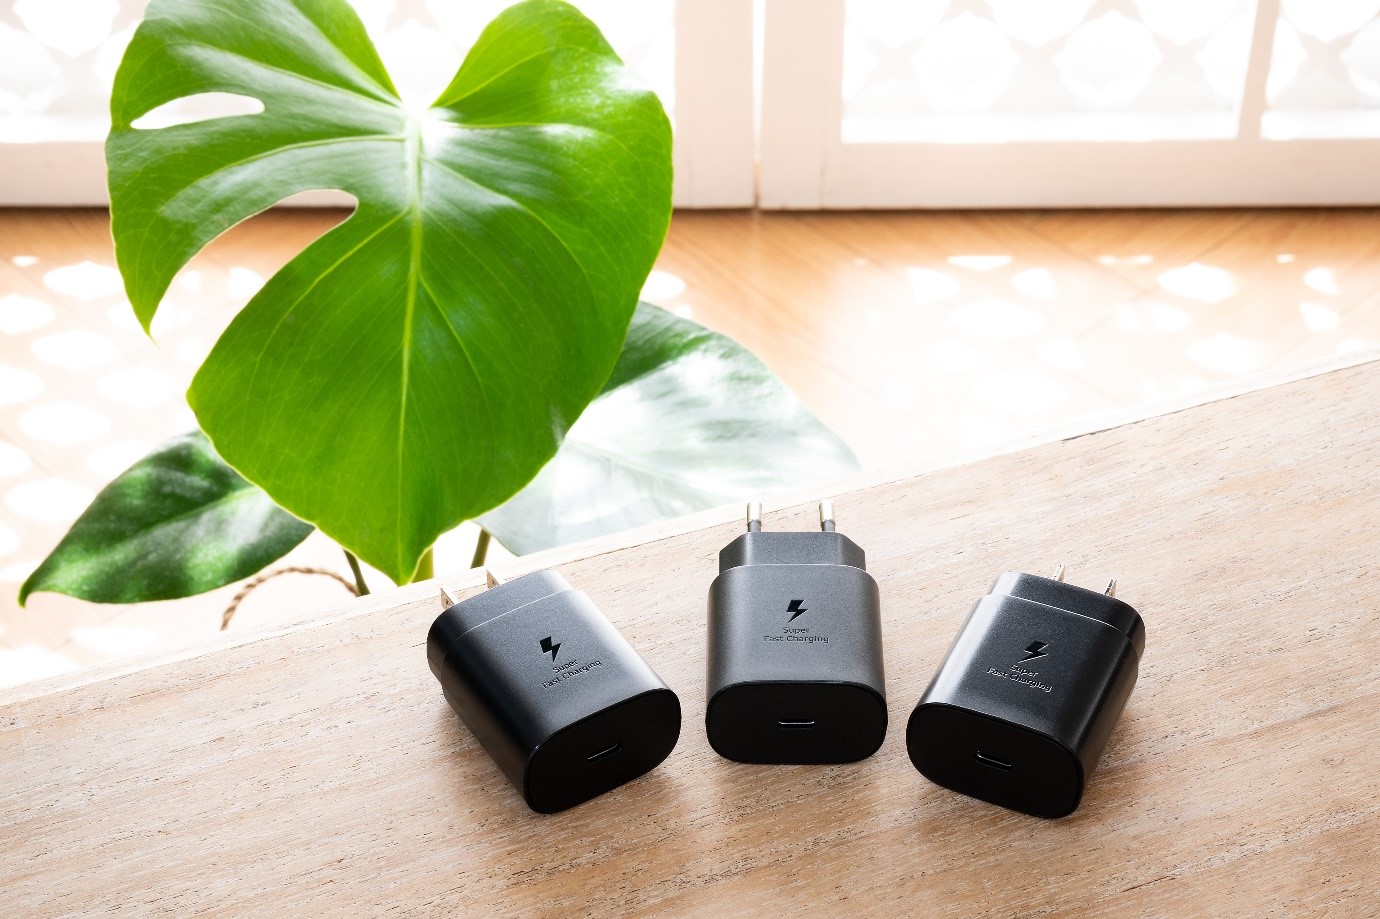 A Greener Galaxy ` Smartphone Chargers That Put the Planet First